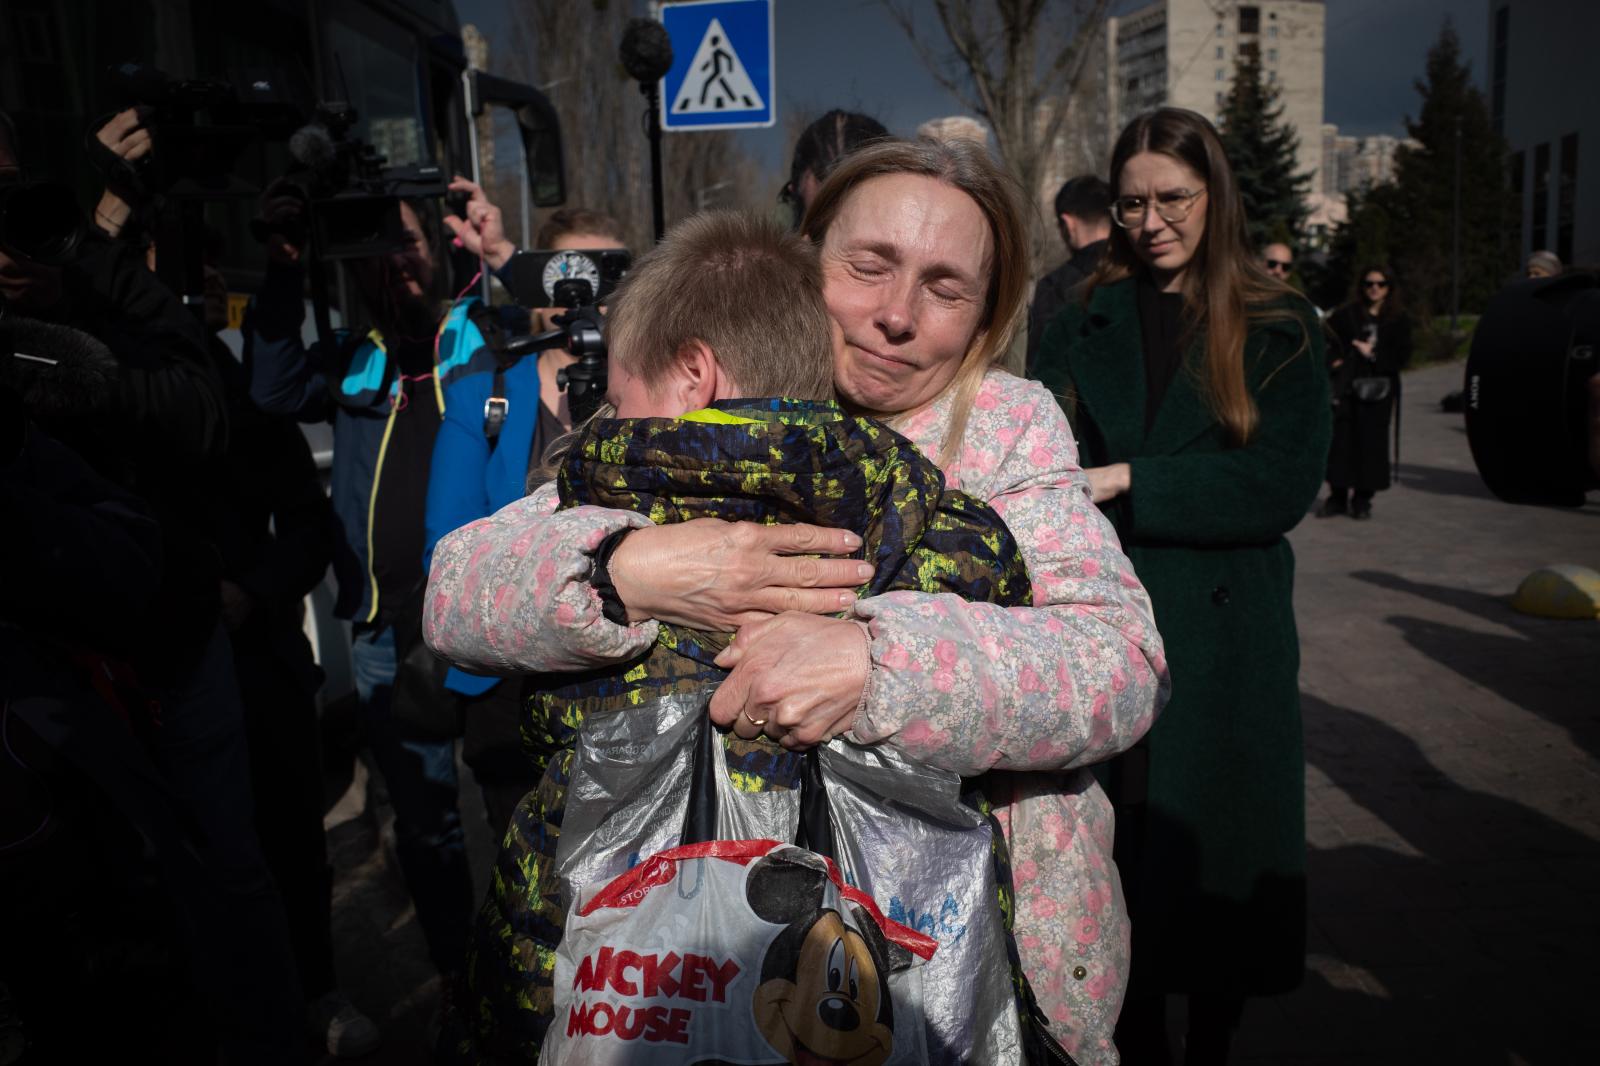 Iryna reunites with her 13-year-old son, January 2024 | Buy this image